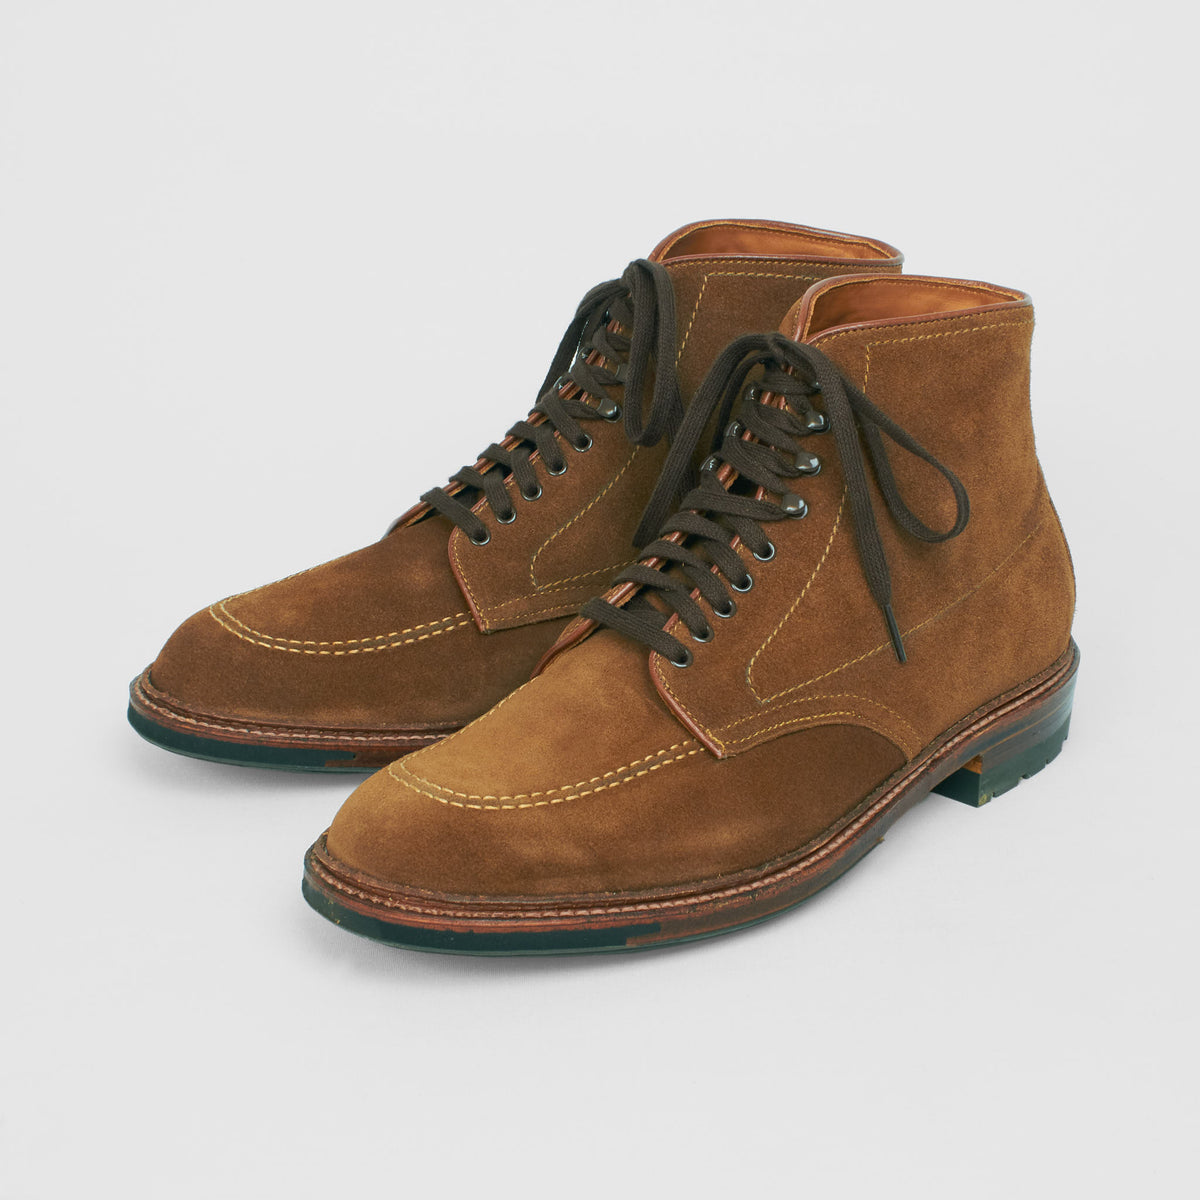 Alden Indy Boot Snuff Suede with Commando Sole 4011